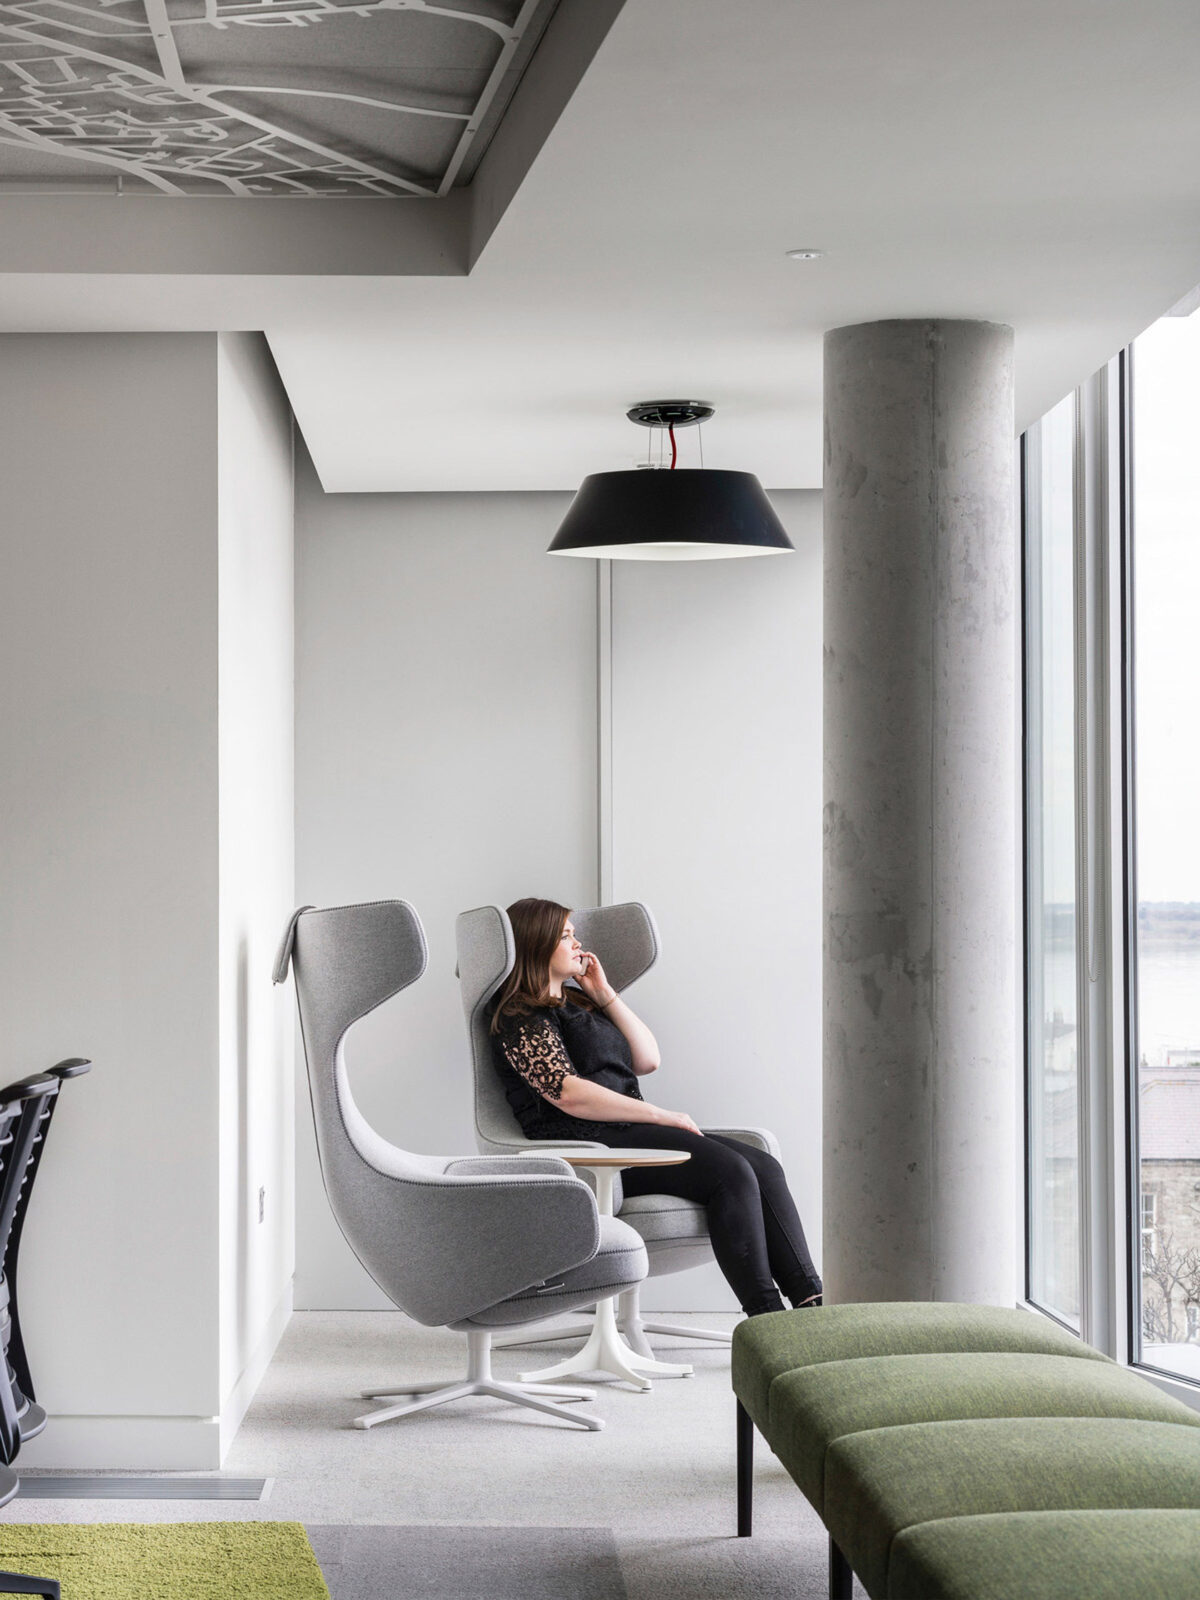 Modern interior with an exposed concrete column, floor-to-ceiling windows, and an open ceiling revealing ductwork. A woman lounges in a gray, wingback swivel chair, complementing a green linear sofa, against the backdrop of urban views, marrying industrial and cozy design elements.